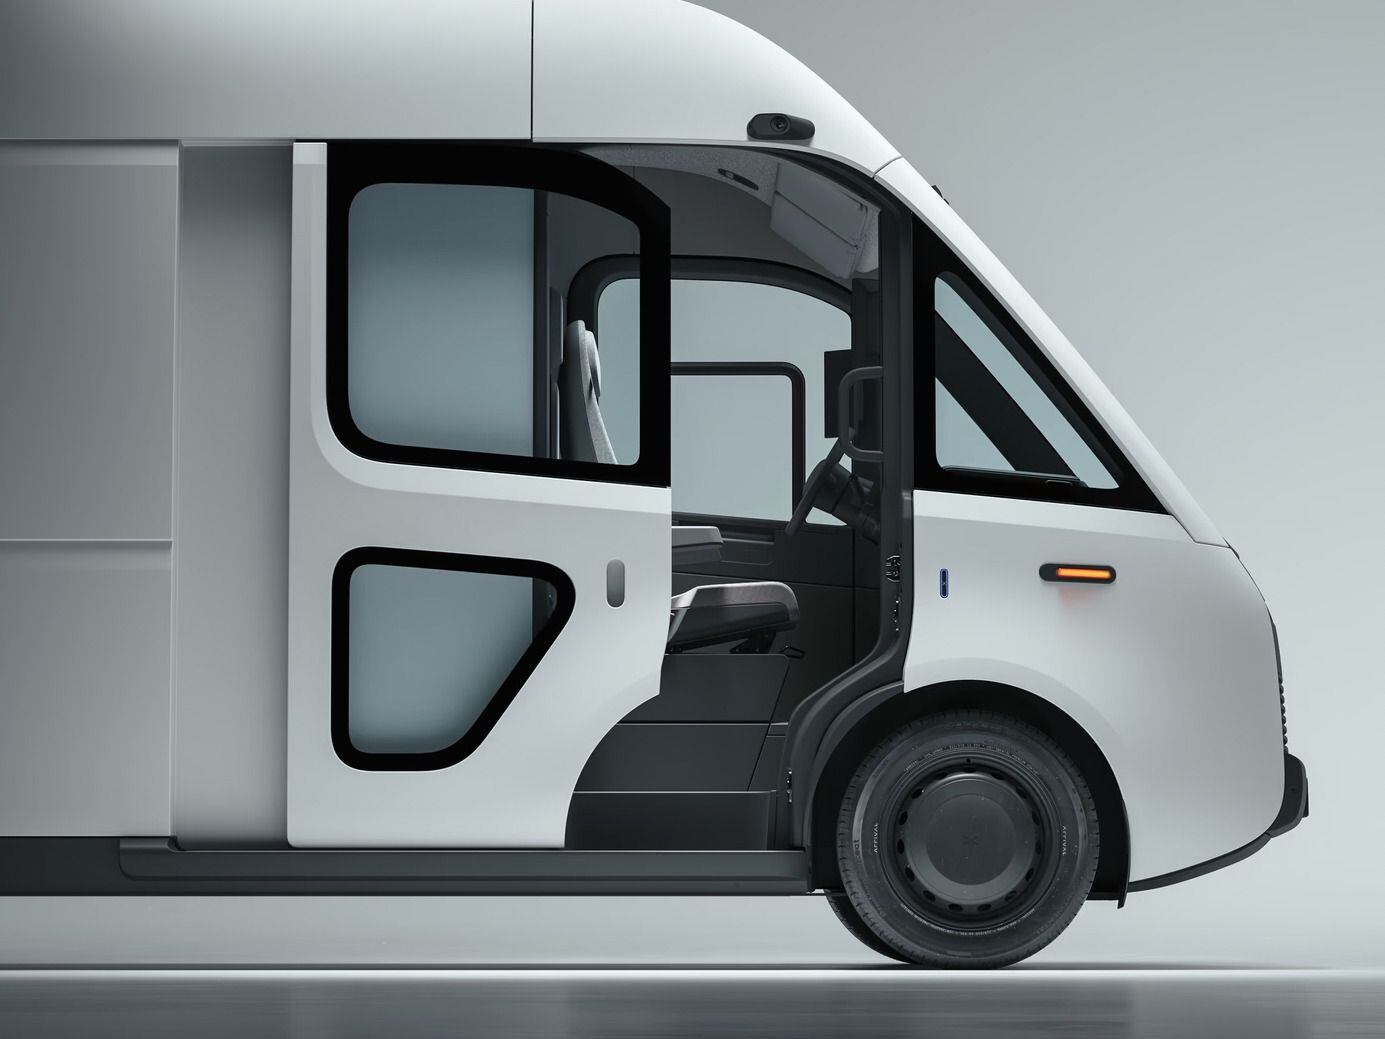 Electric van builder Arrival’s UK arm goes into administration